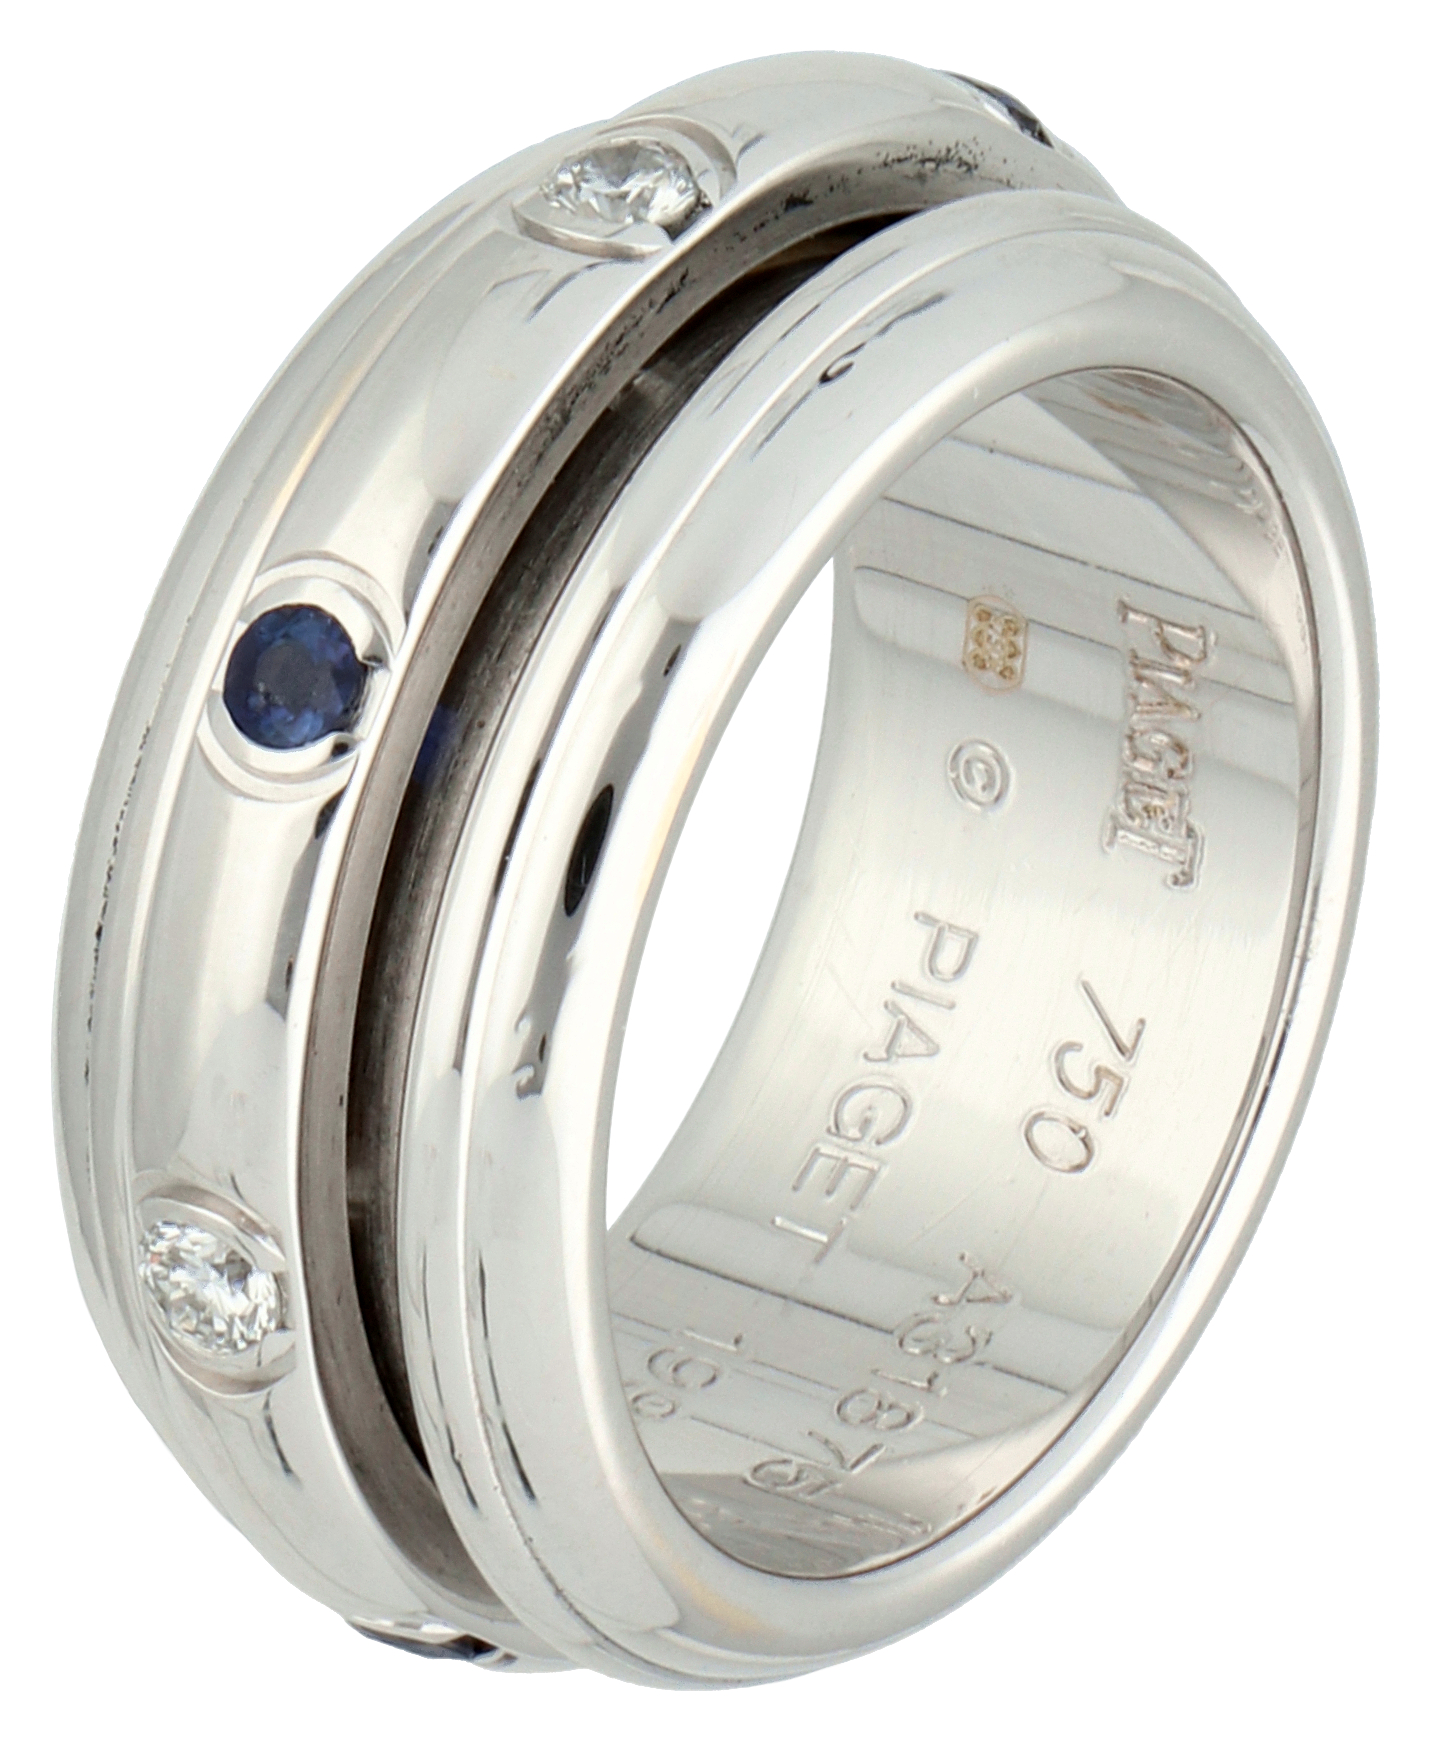 No Reserve - Piaget 18K white gold Possession ring set with diamond and sapphire. - Image 2 of 3